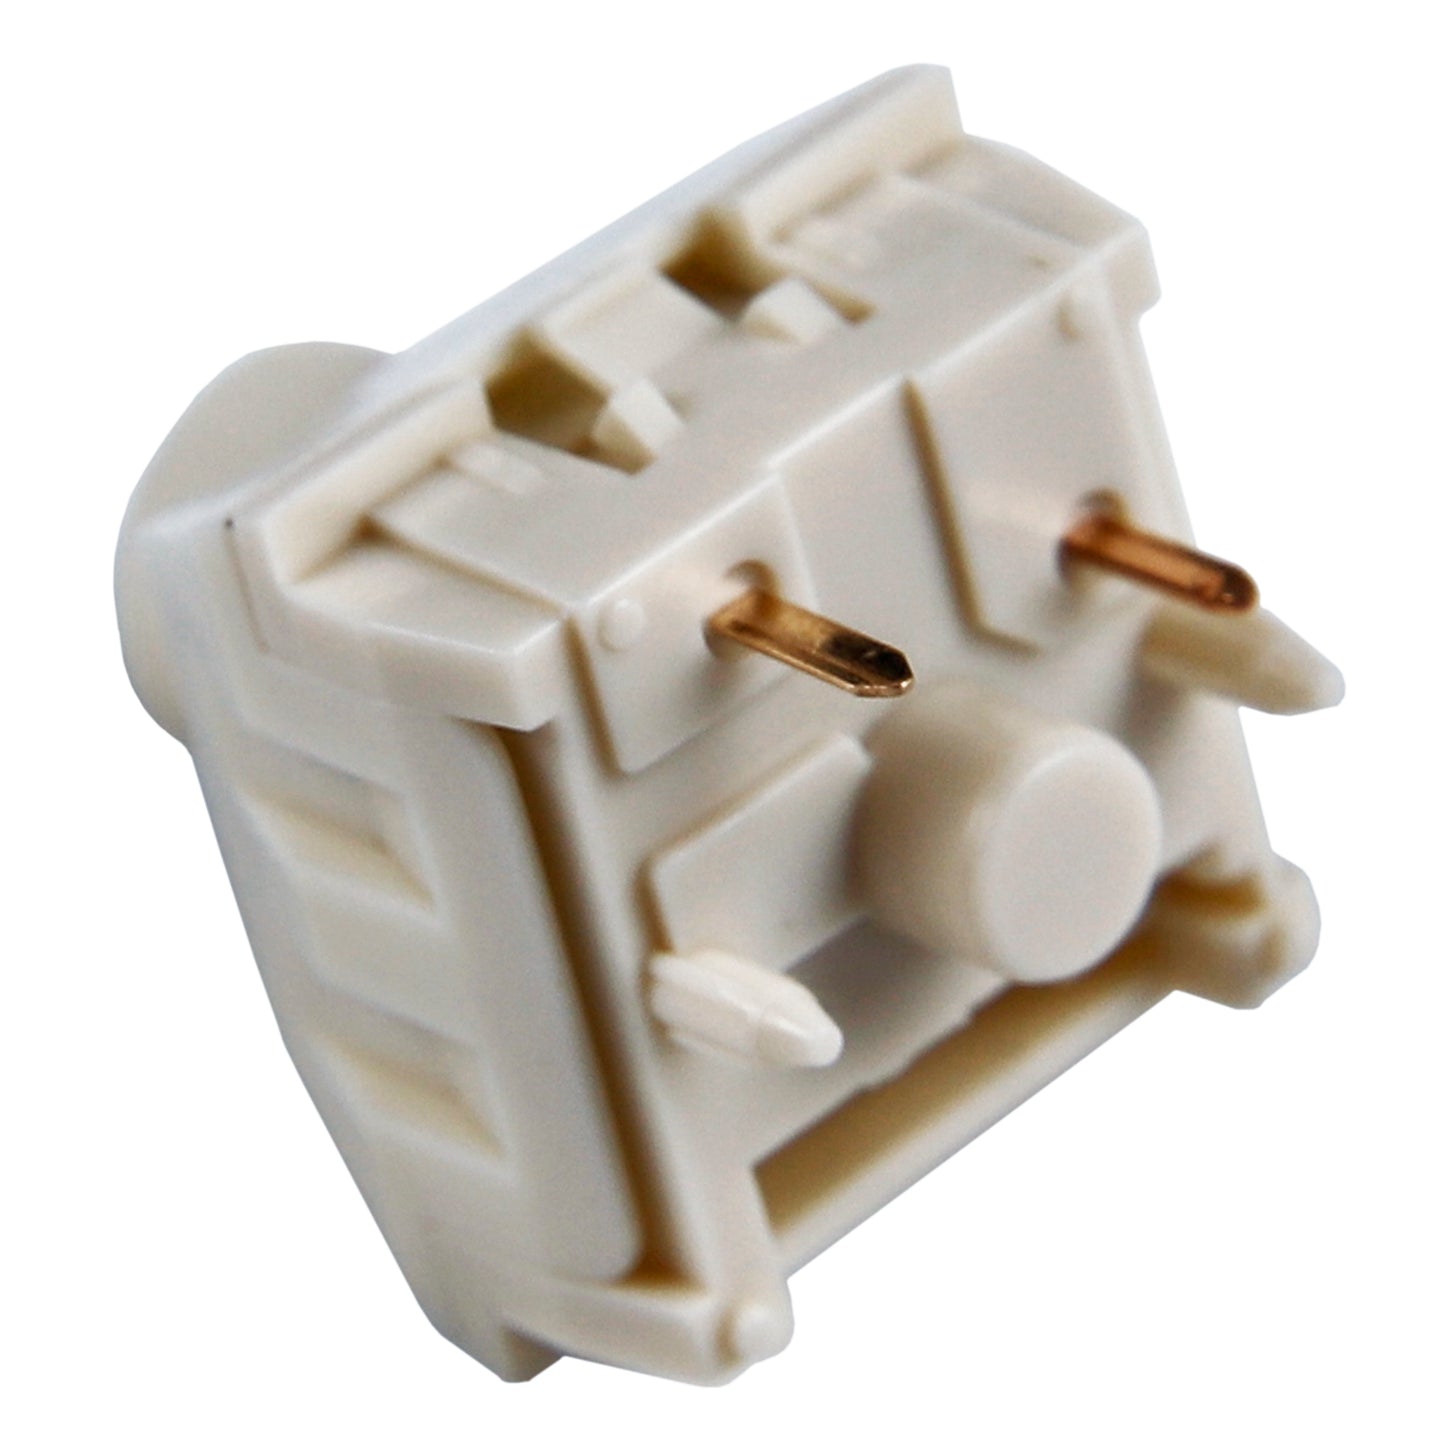 Kailh Novelty Box V2 Cream(Liner 45g 5 Pin POM Switches/Waterproof Dustproof)